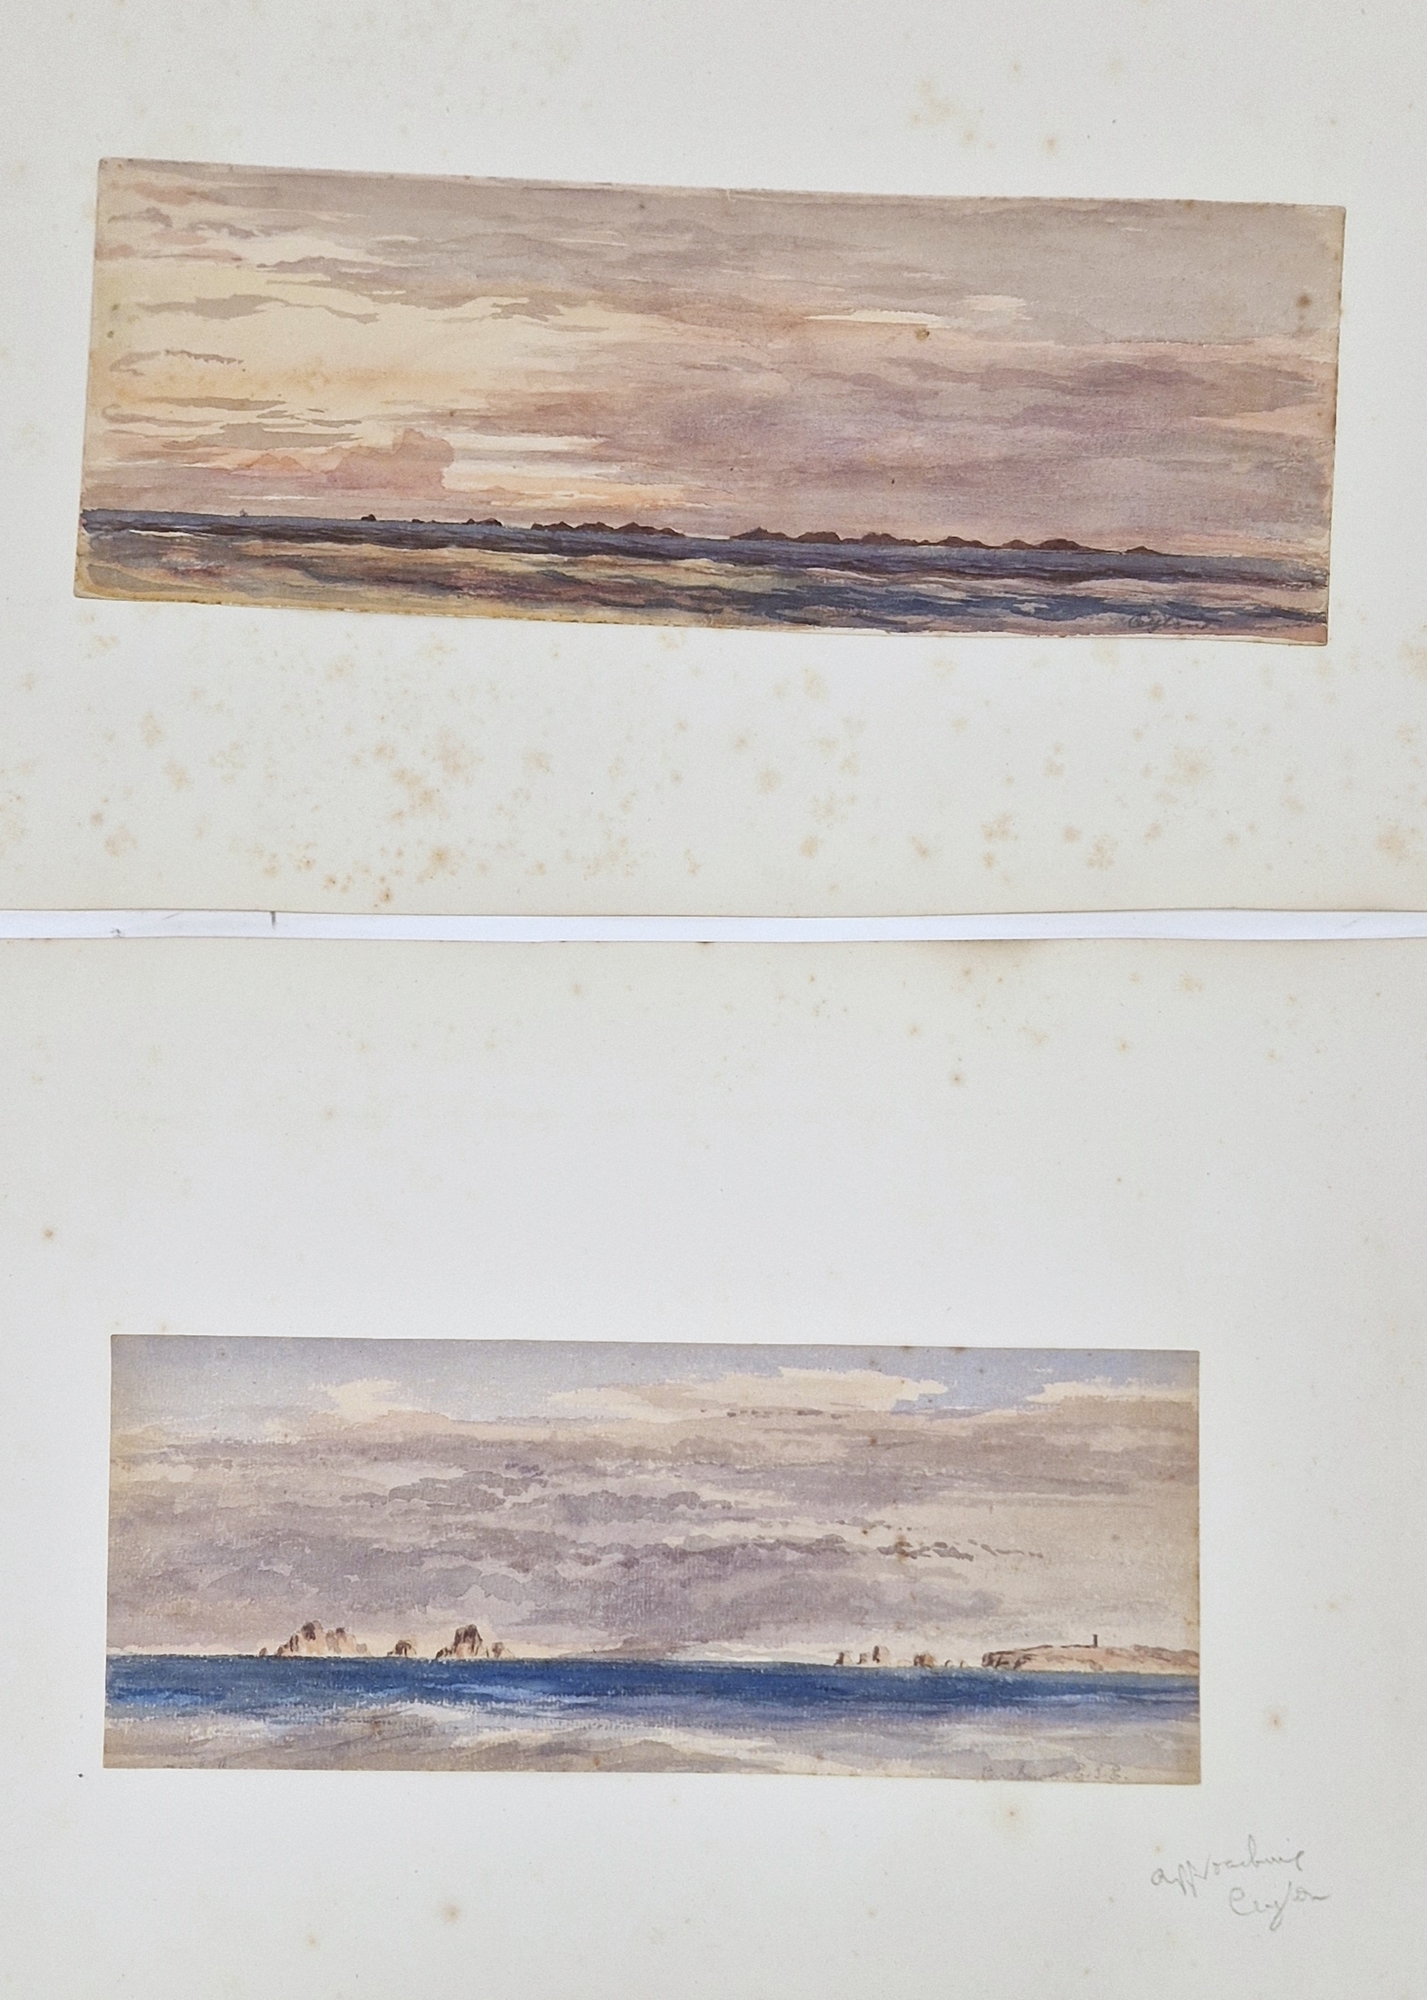 Watercolour drawings - collection Attrib. A H. Walter " A Passage from India to England 1873" - Image 3 of 13